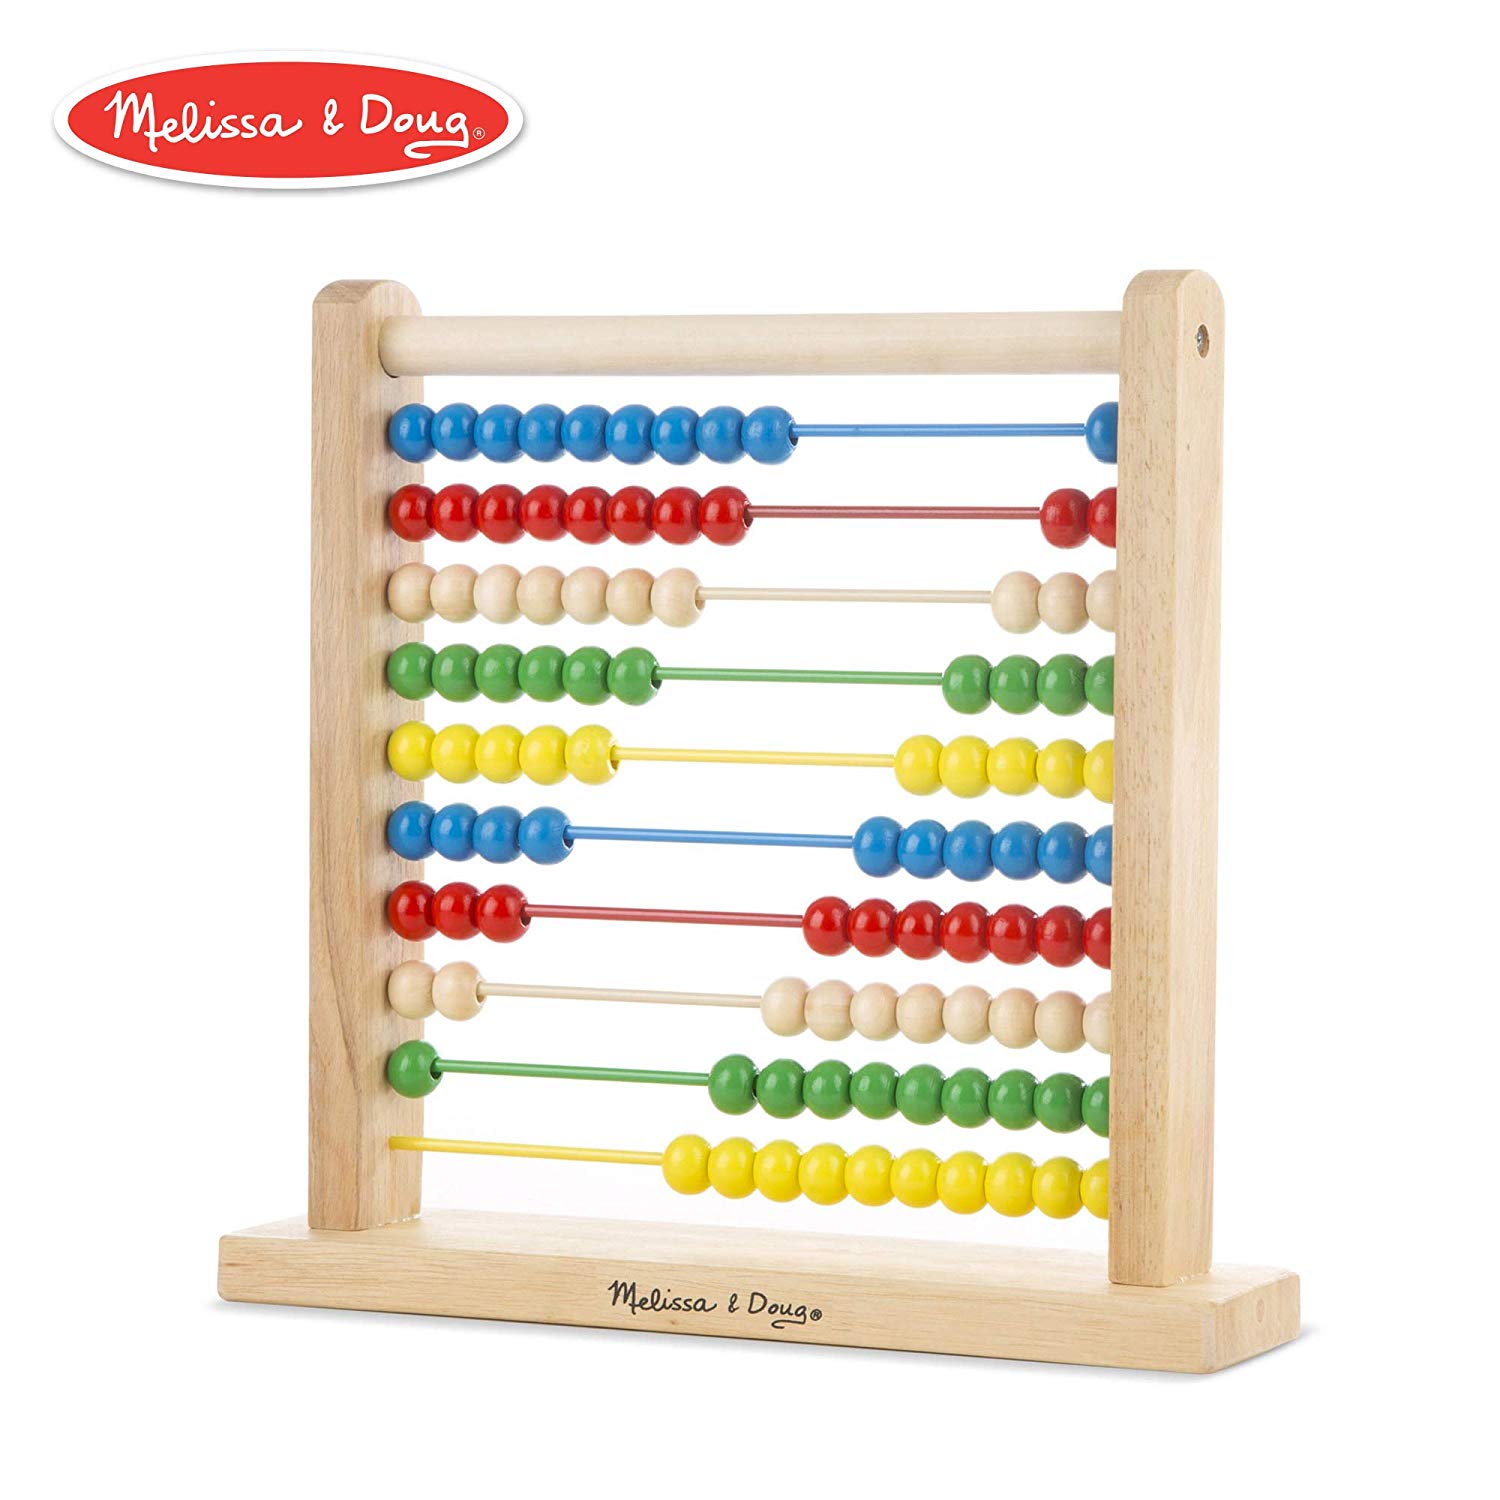 math toys for 4 year olds